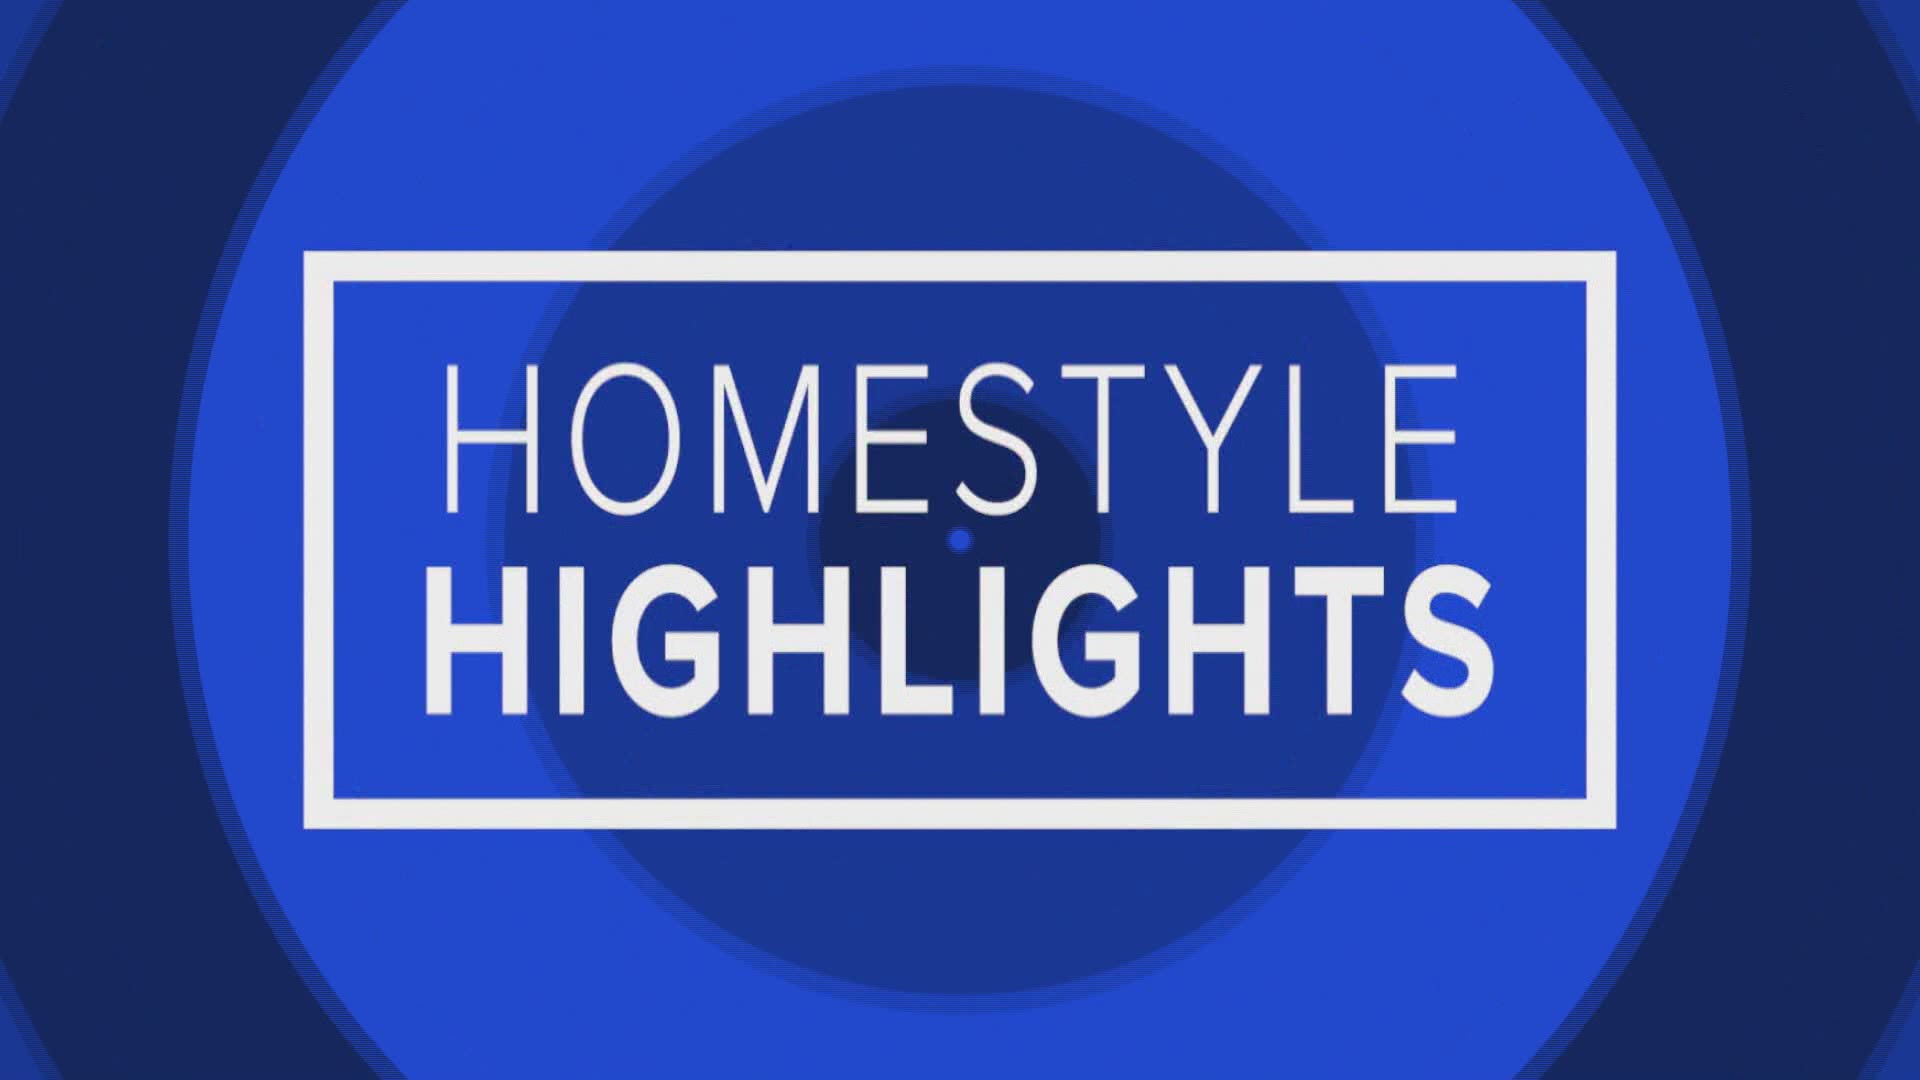 A dad goes the extra mile in this edition of Homestyle Highlights.